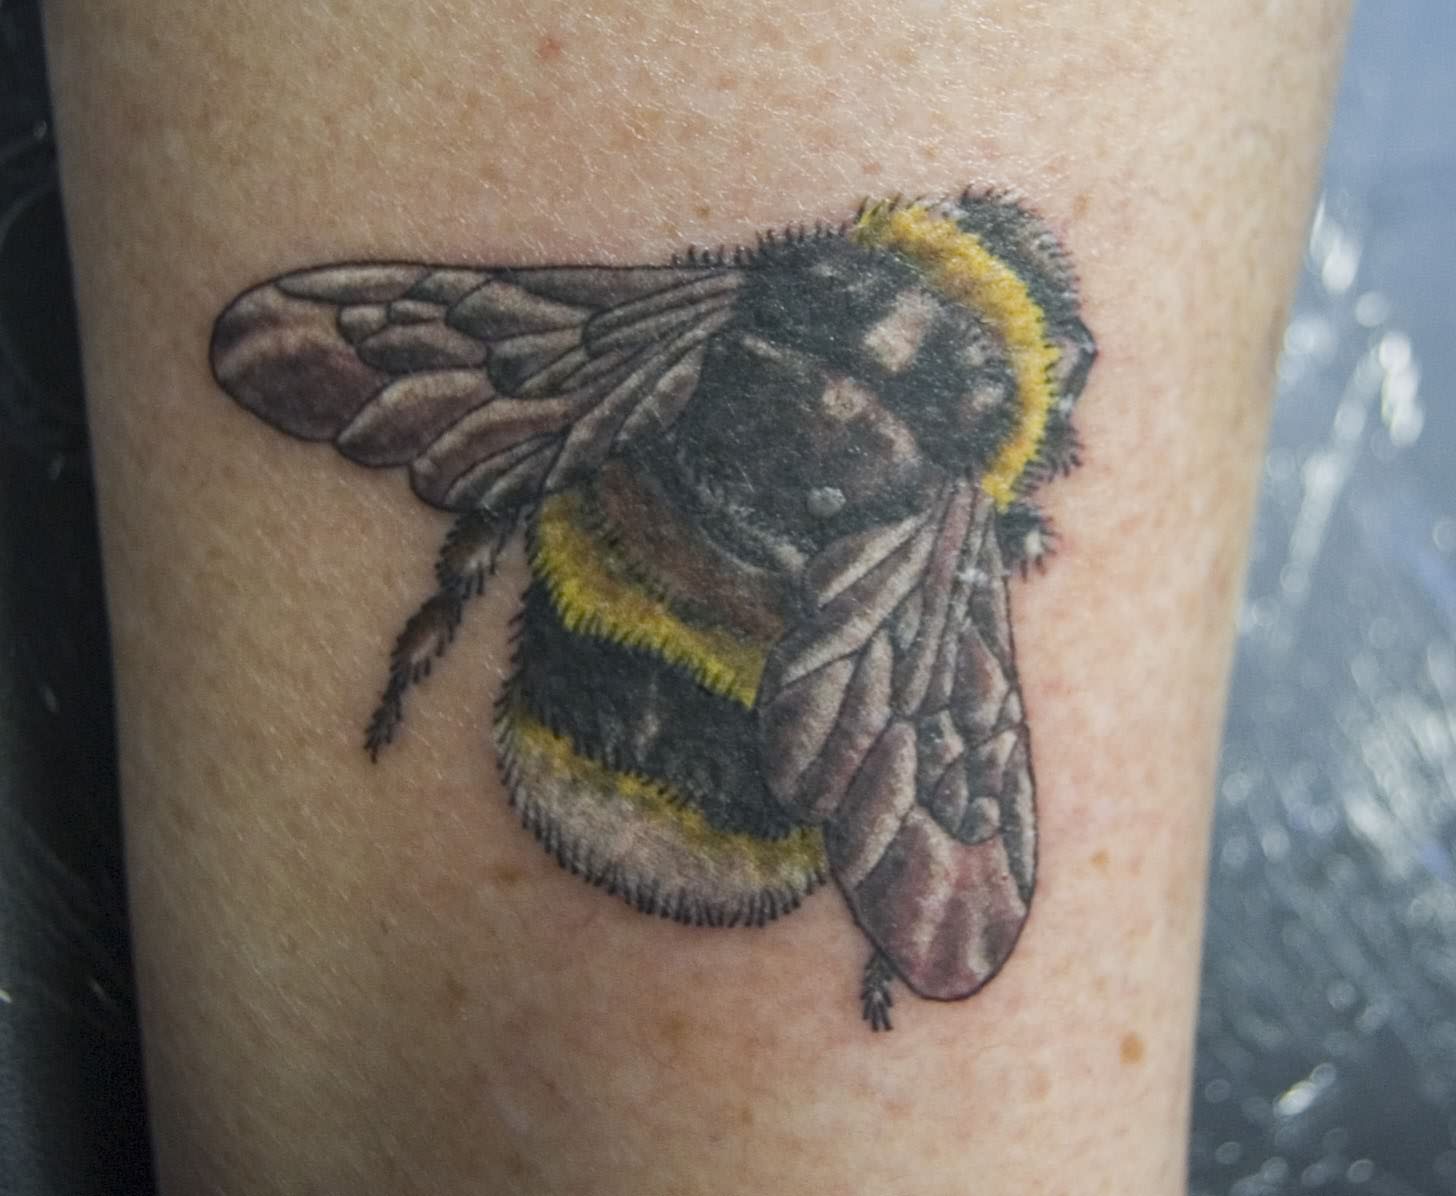 Awesome Bumblebee Tattoo Design For Sleeve